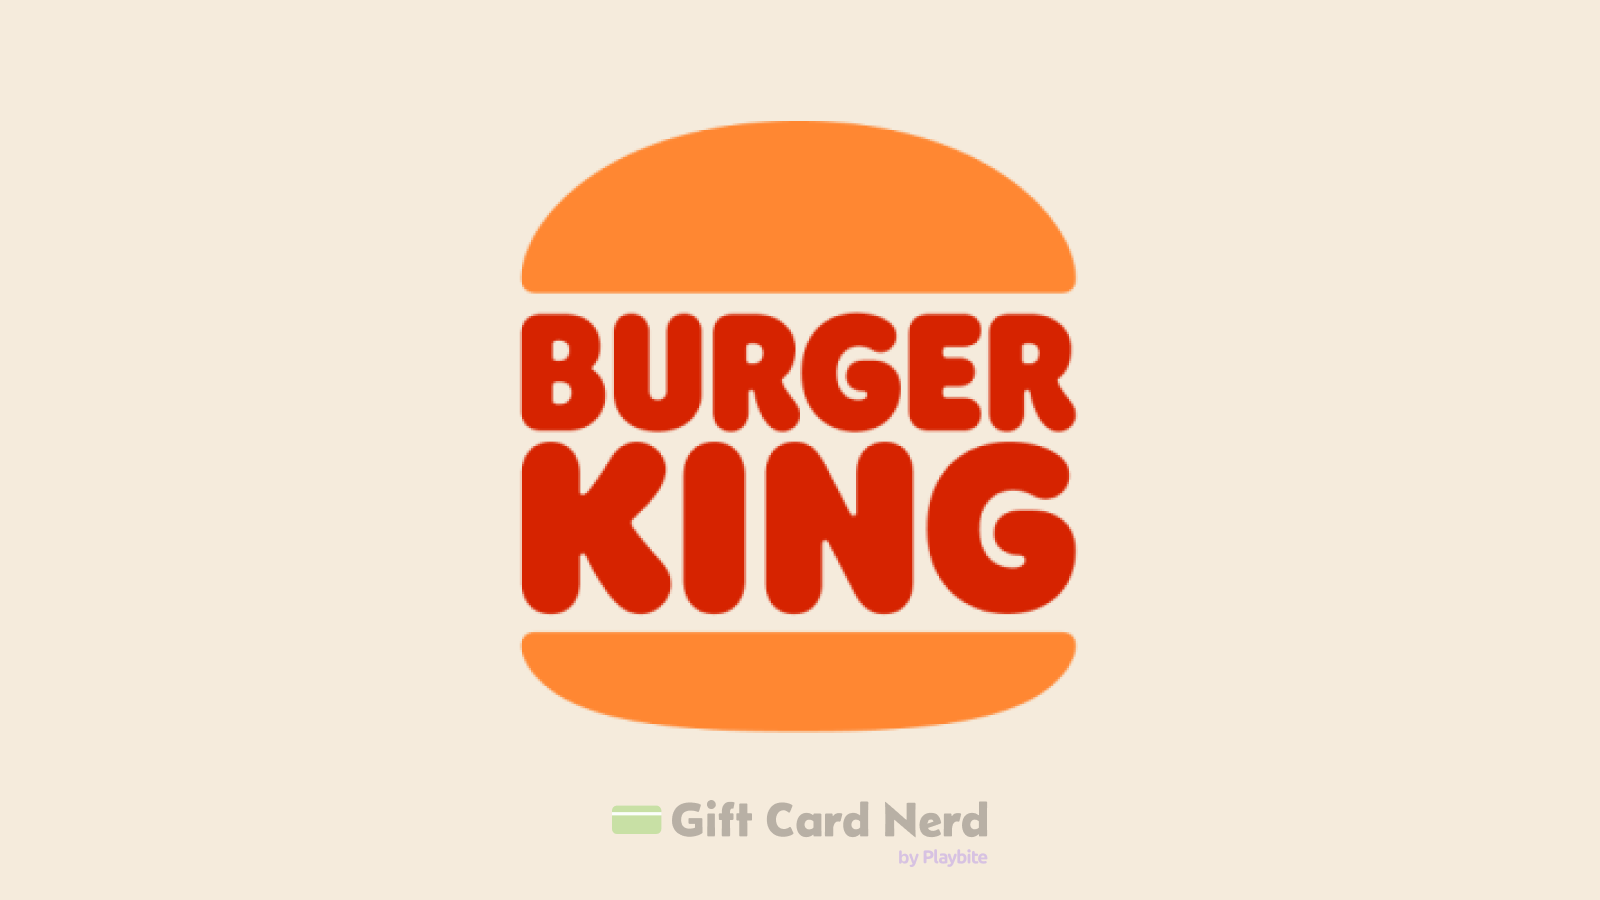 Can I Use a Burger King Gift Card on Venmo?